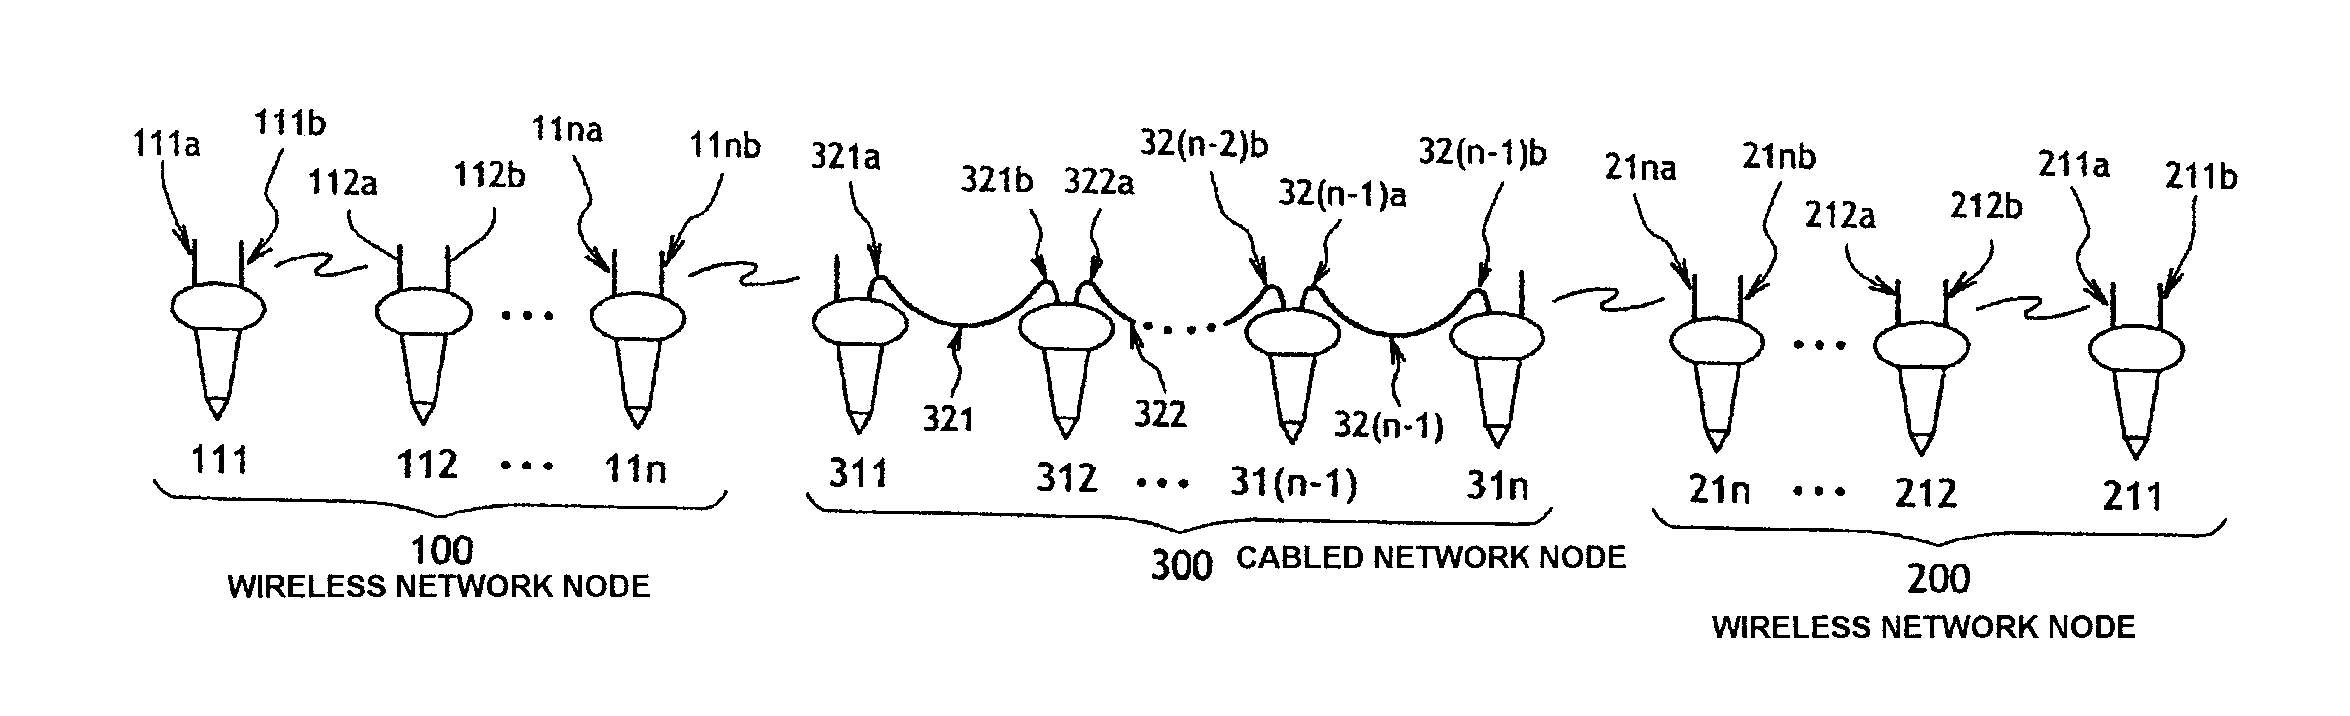 Mixed wireless and cabled data acquisition network